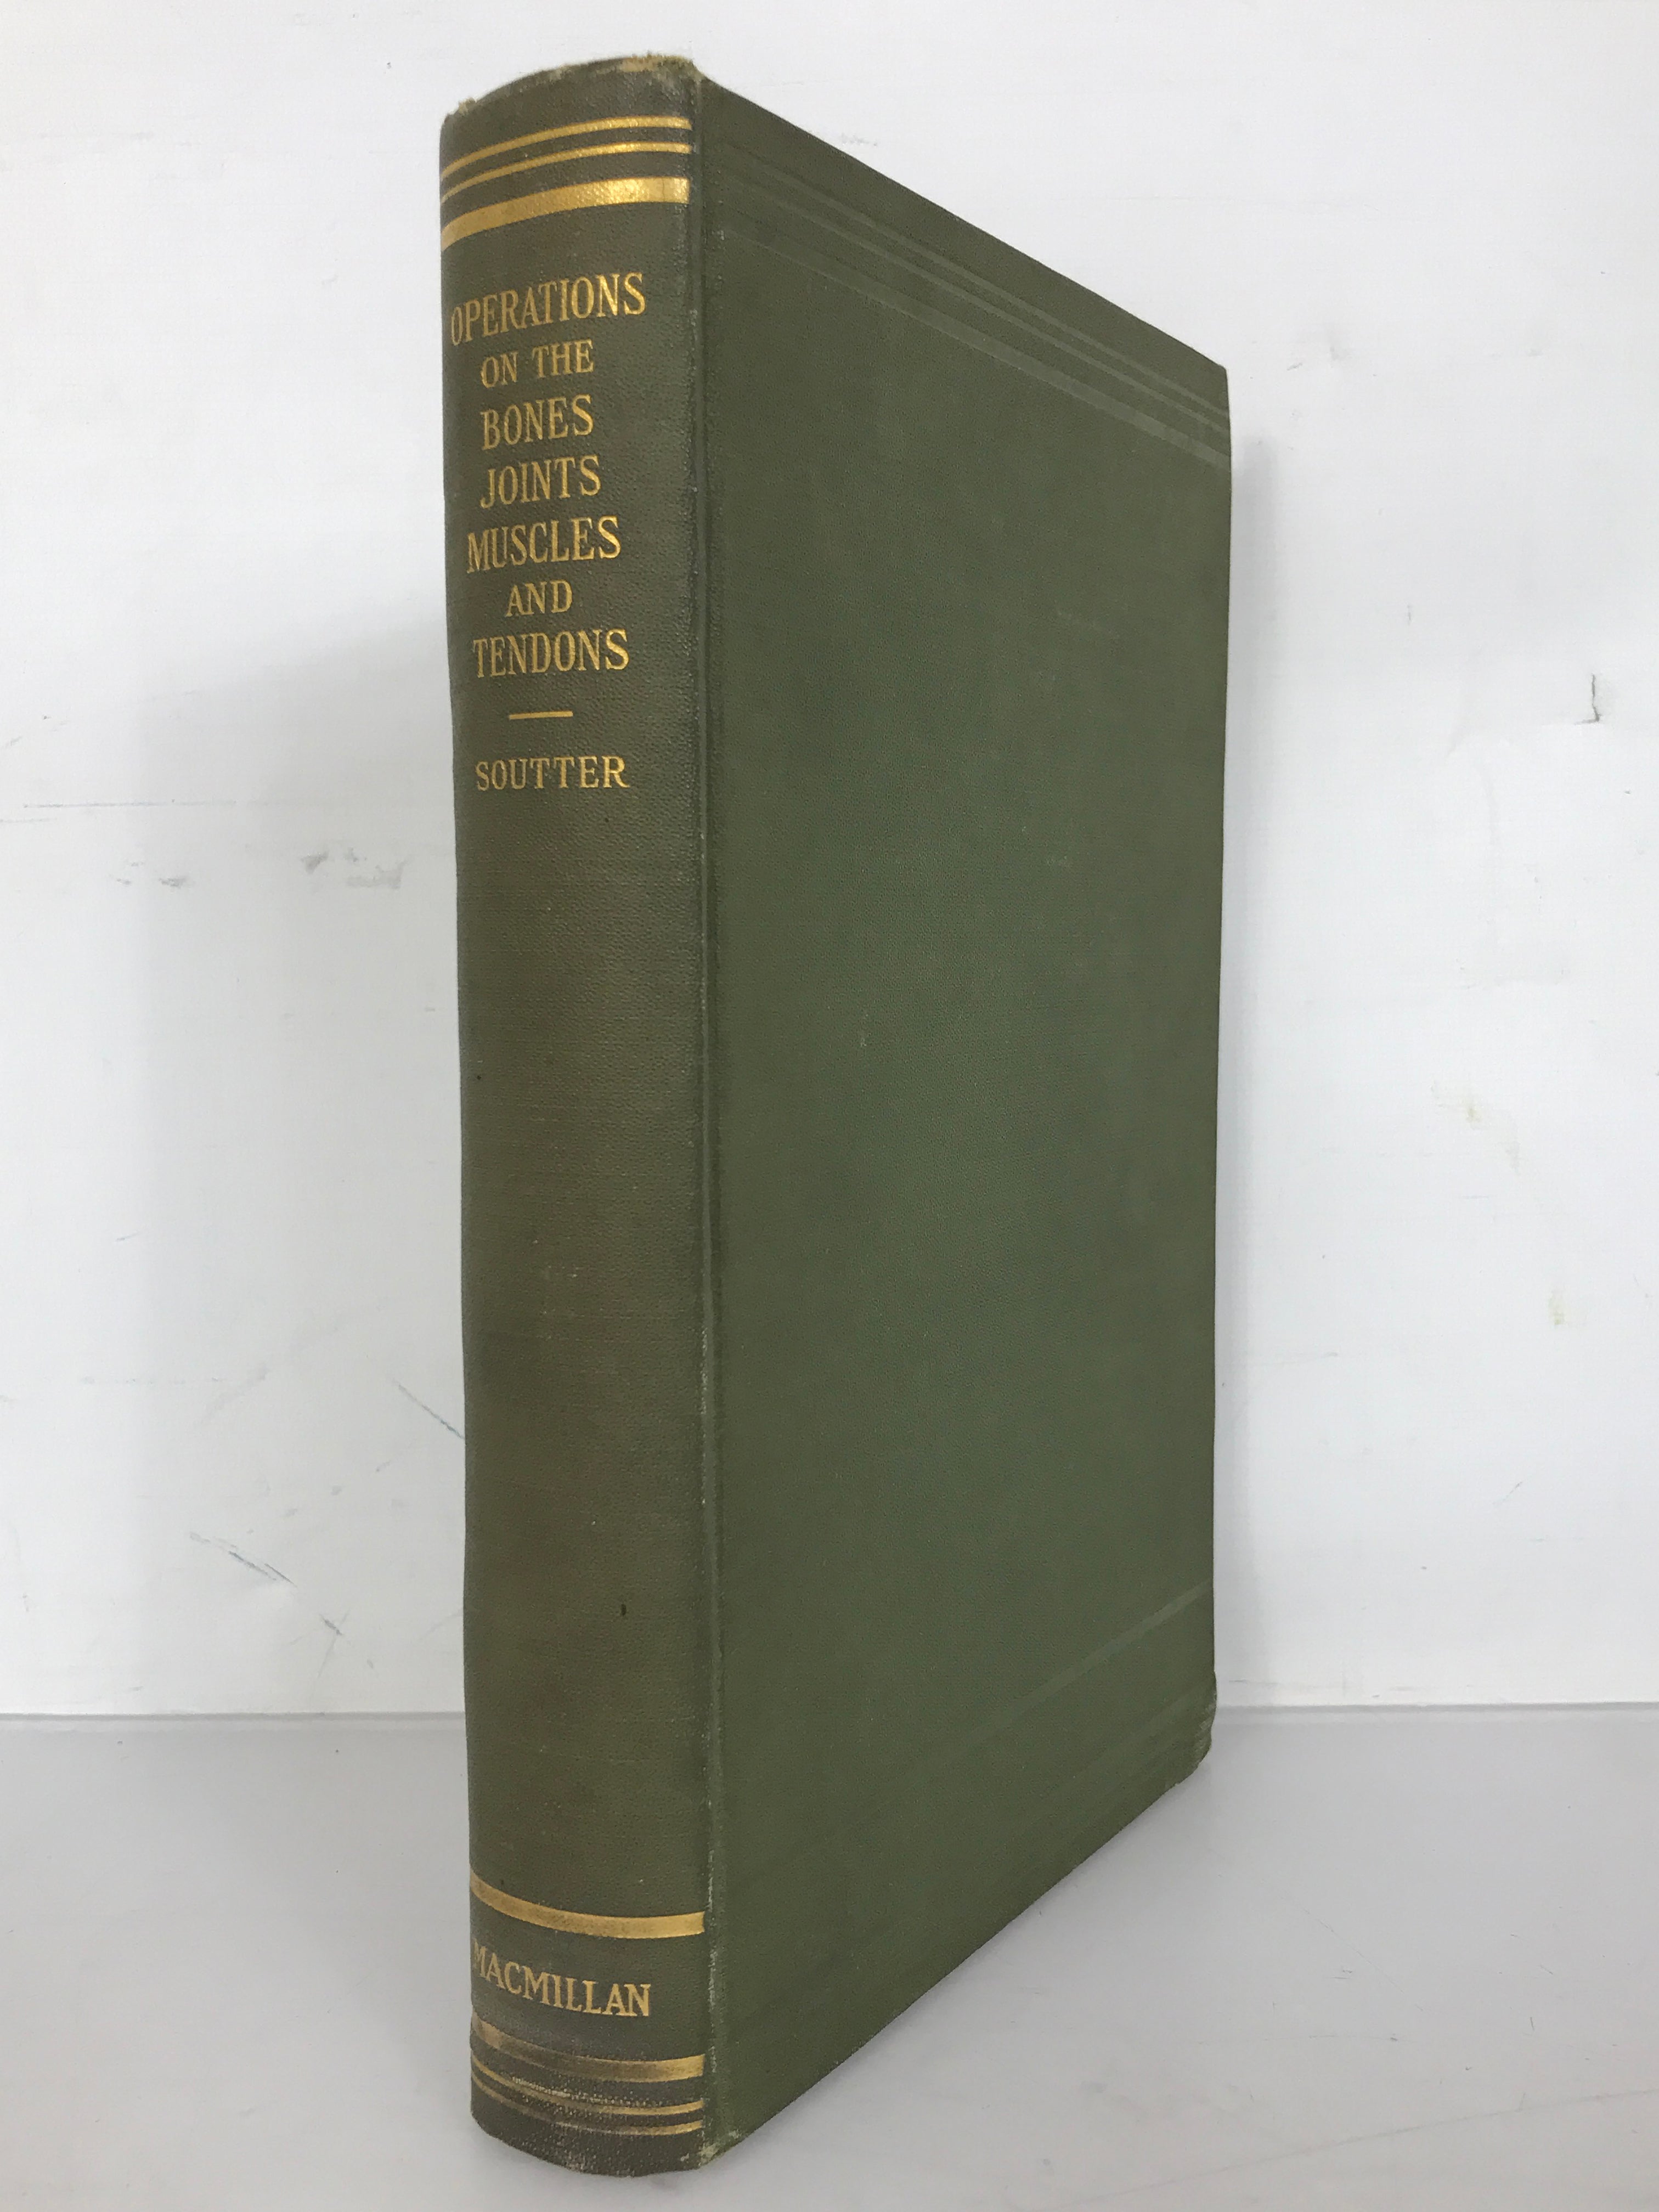 Antique First Edition Surgical Text: Technique of Operations on the Bones, Joints, Muscles and Tendons by Robert Soutter 1917 HC